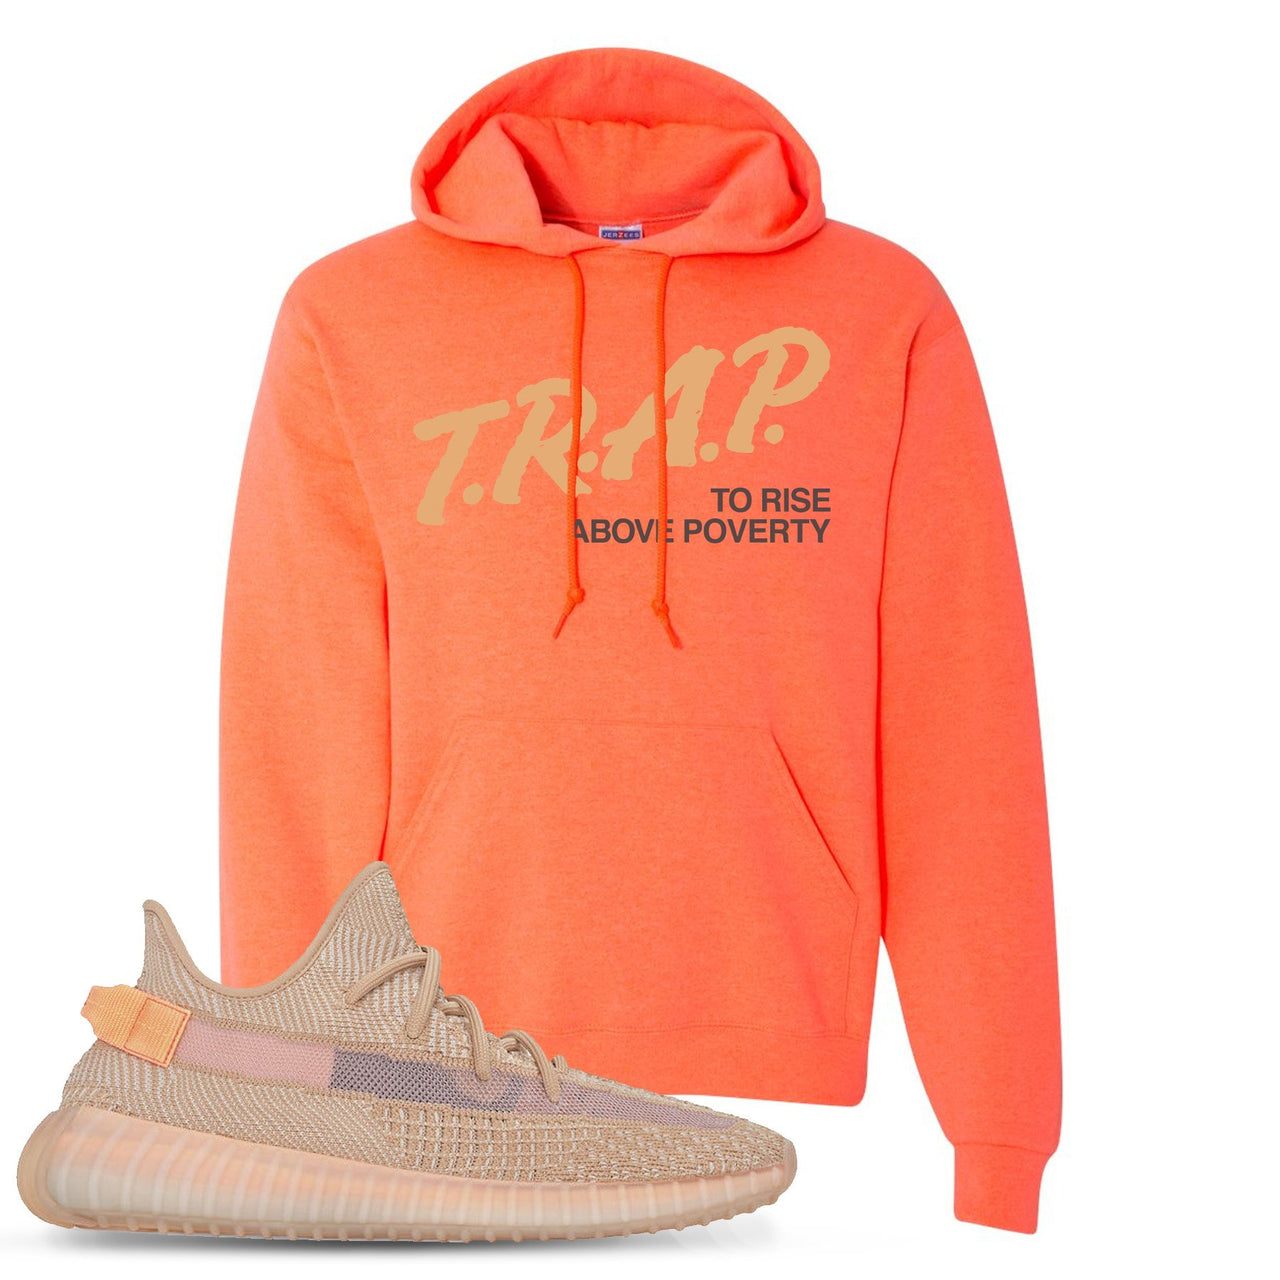 Clay v2 350s Hoodie | Trap To Rise Above Poverty, Heathered Coral